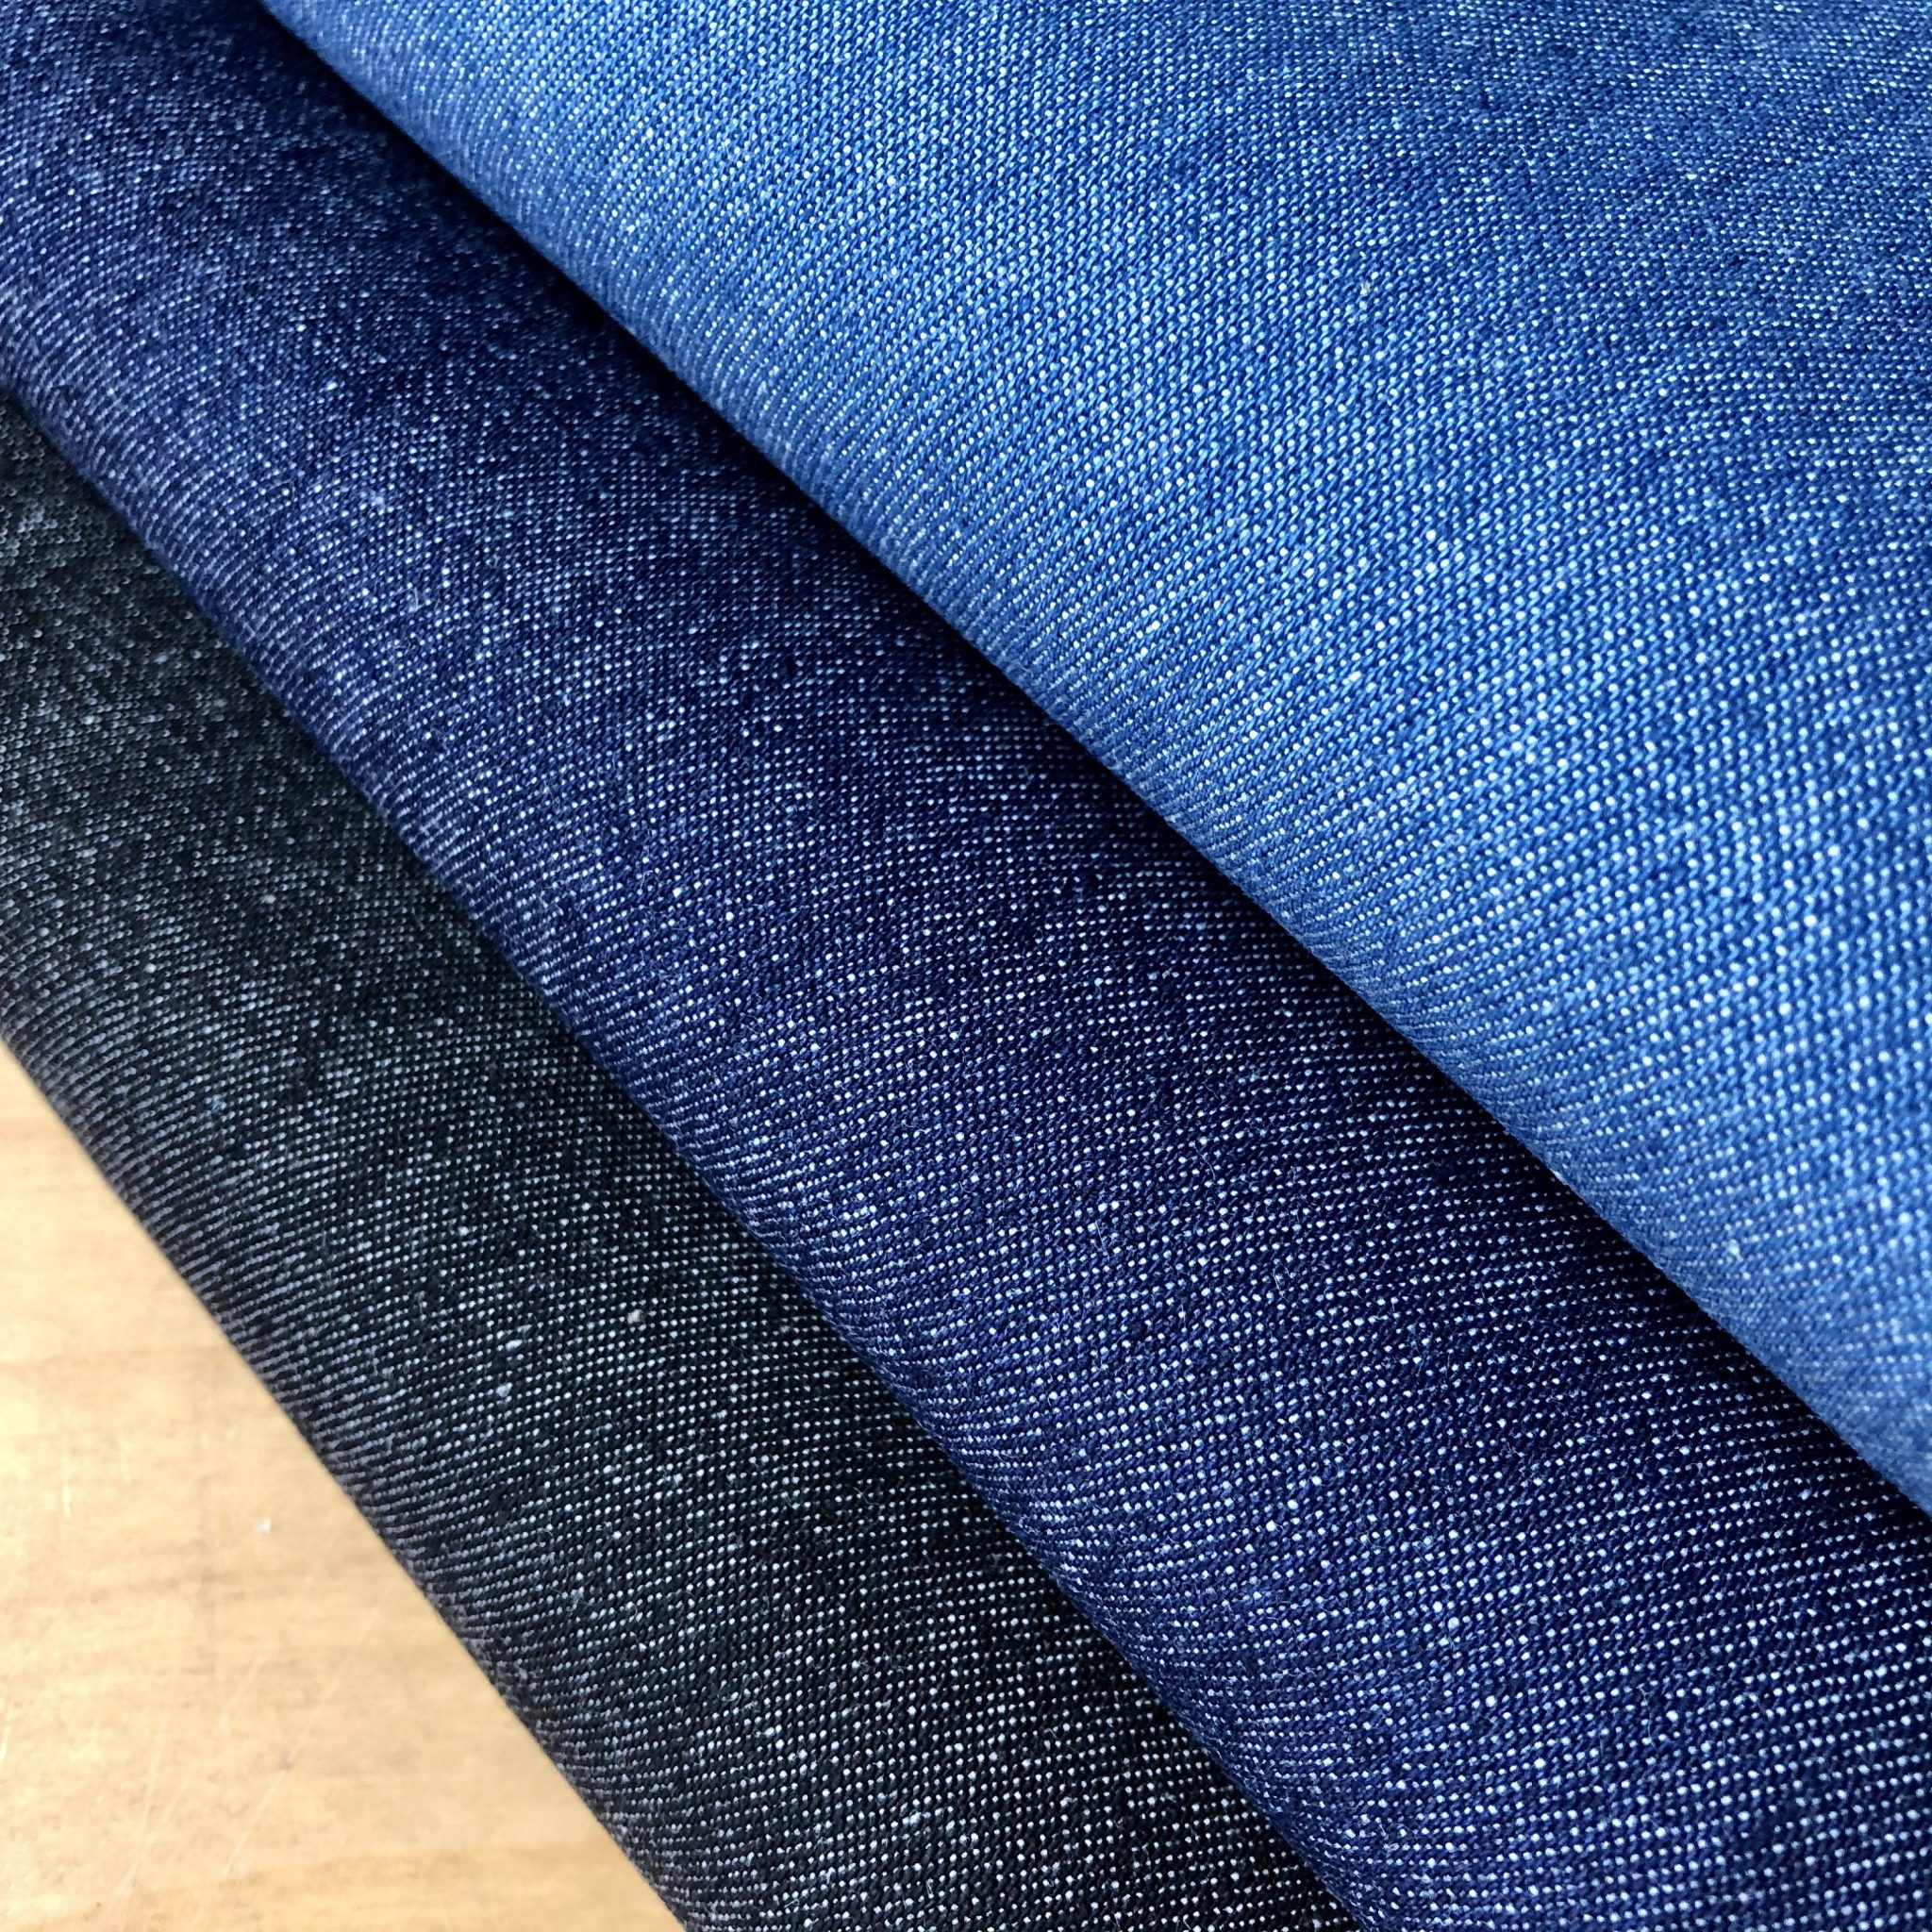 7.5oz Denim Fabric Washed Jeans Dressmaking Cotton Upholstery Material ...